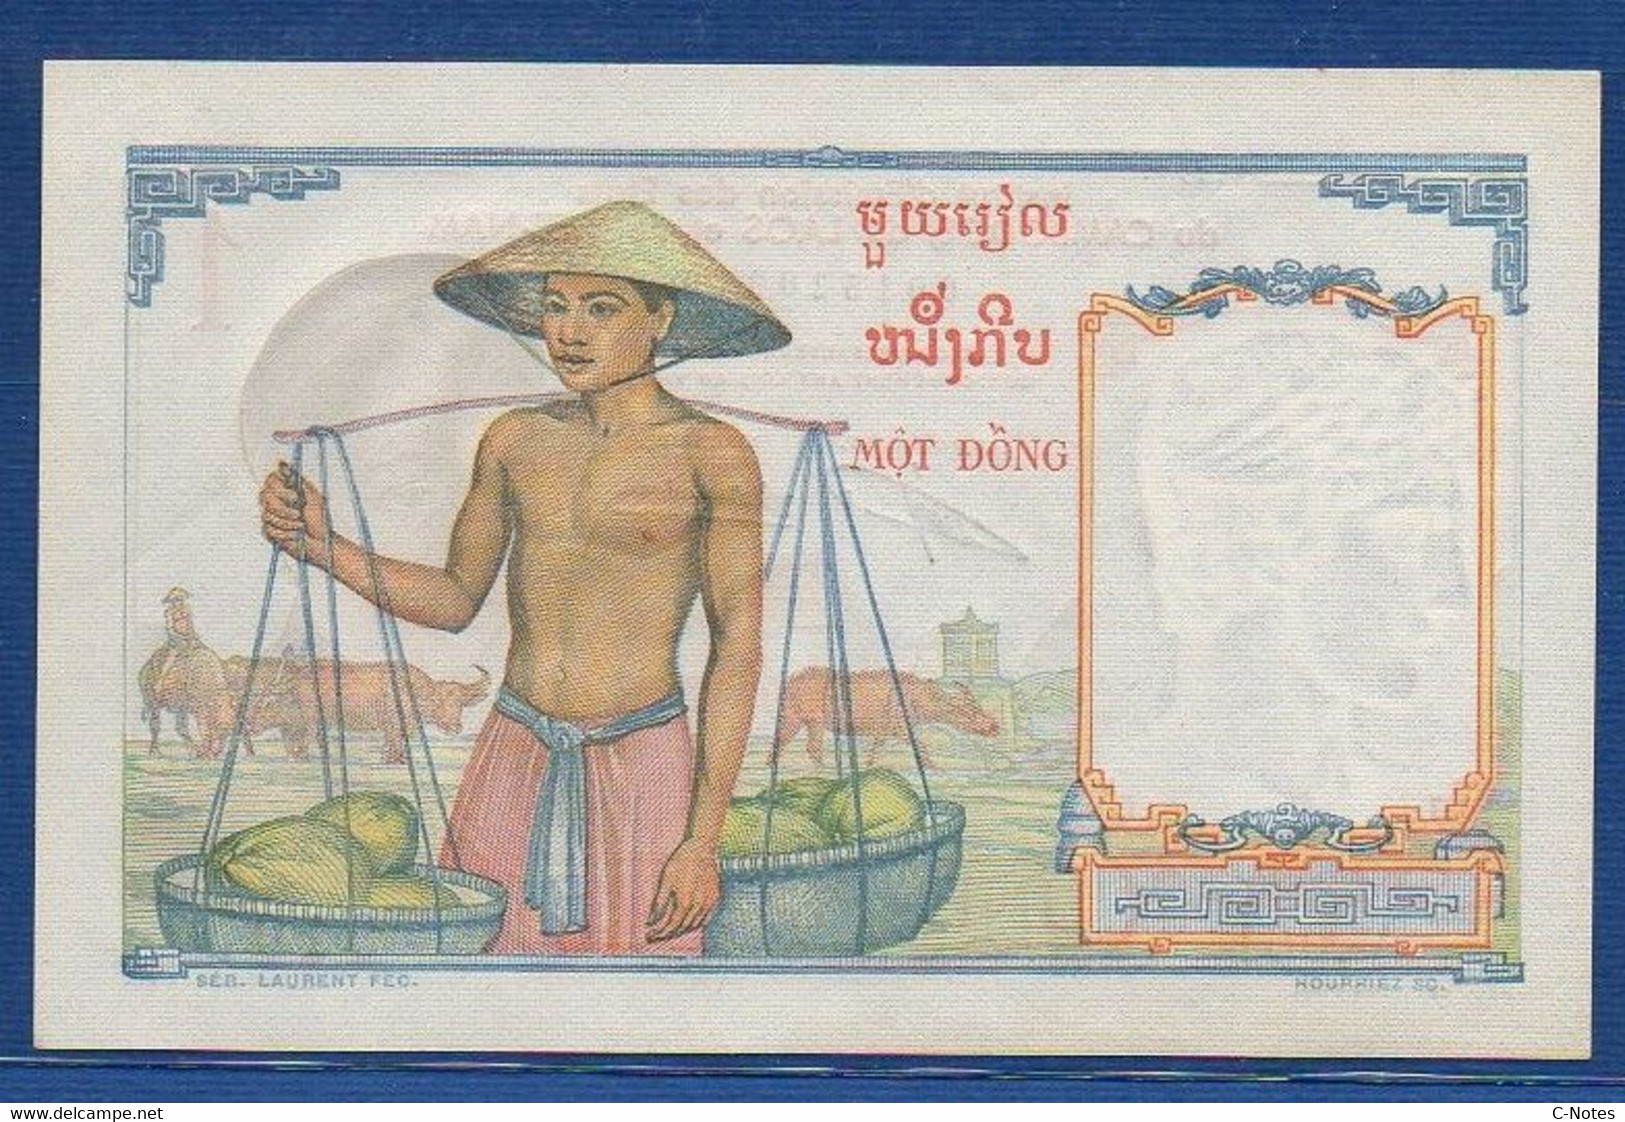 FRENCH INDOCHINA - P. 92 –  1 Piastre ND (1953) UNC-, S/n V.061 910 - Indochina